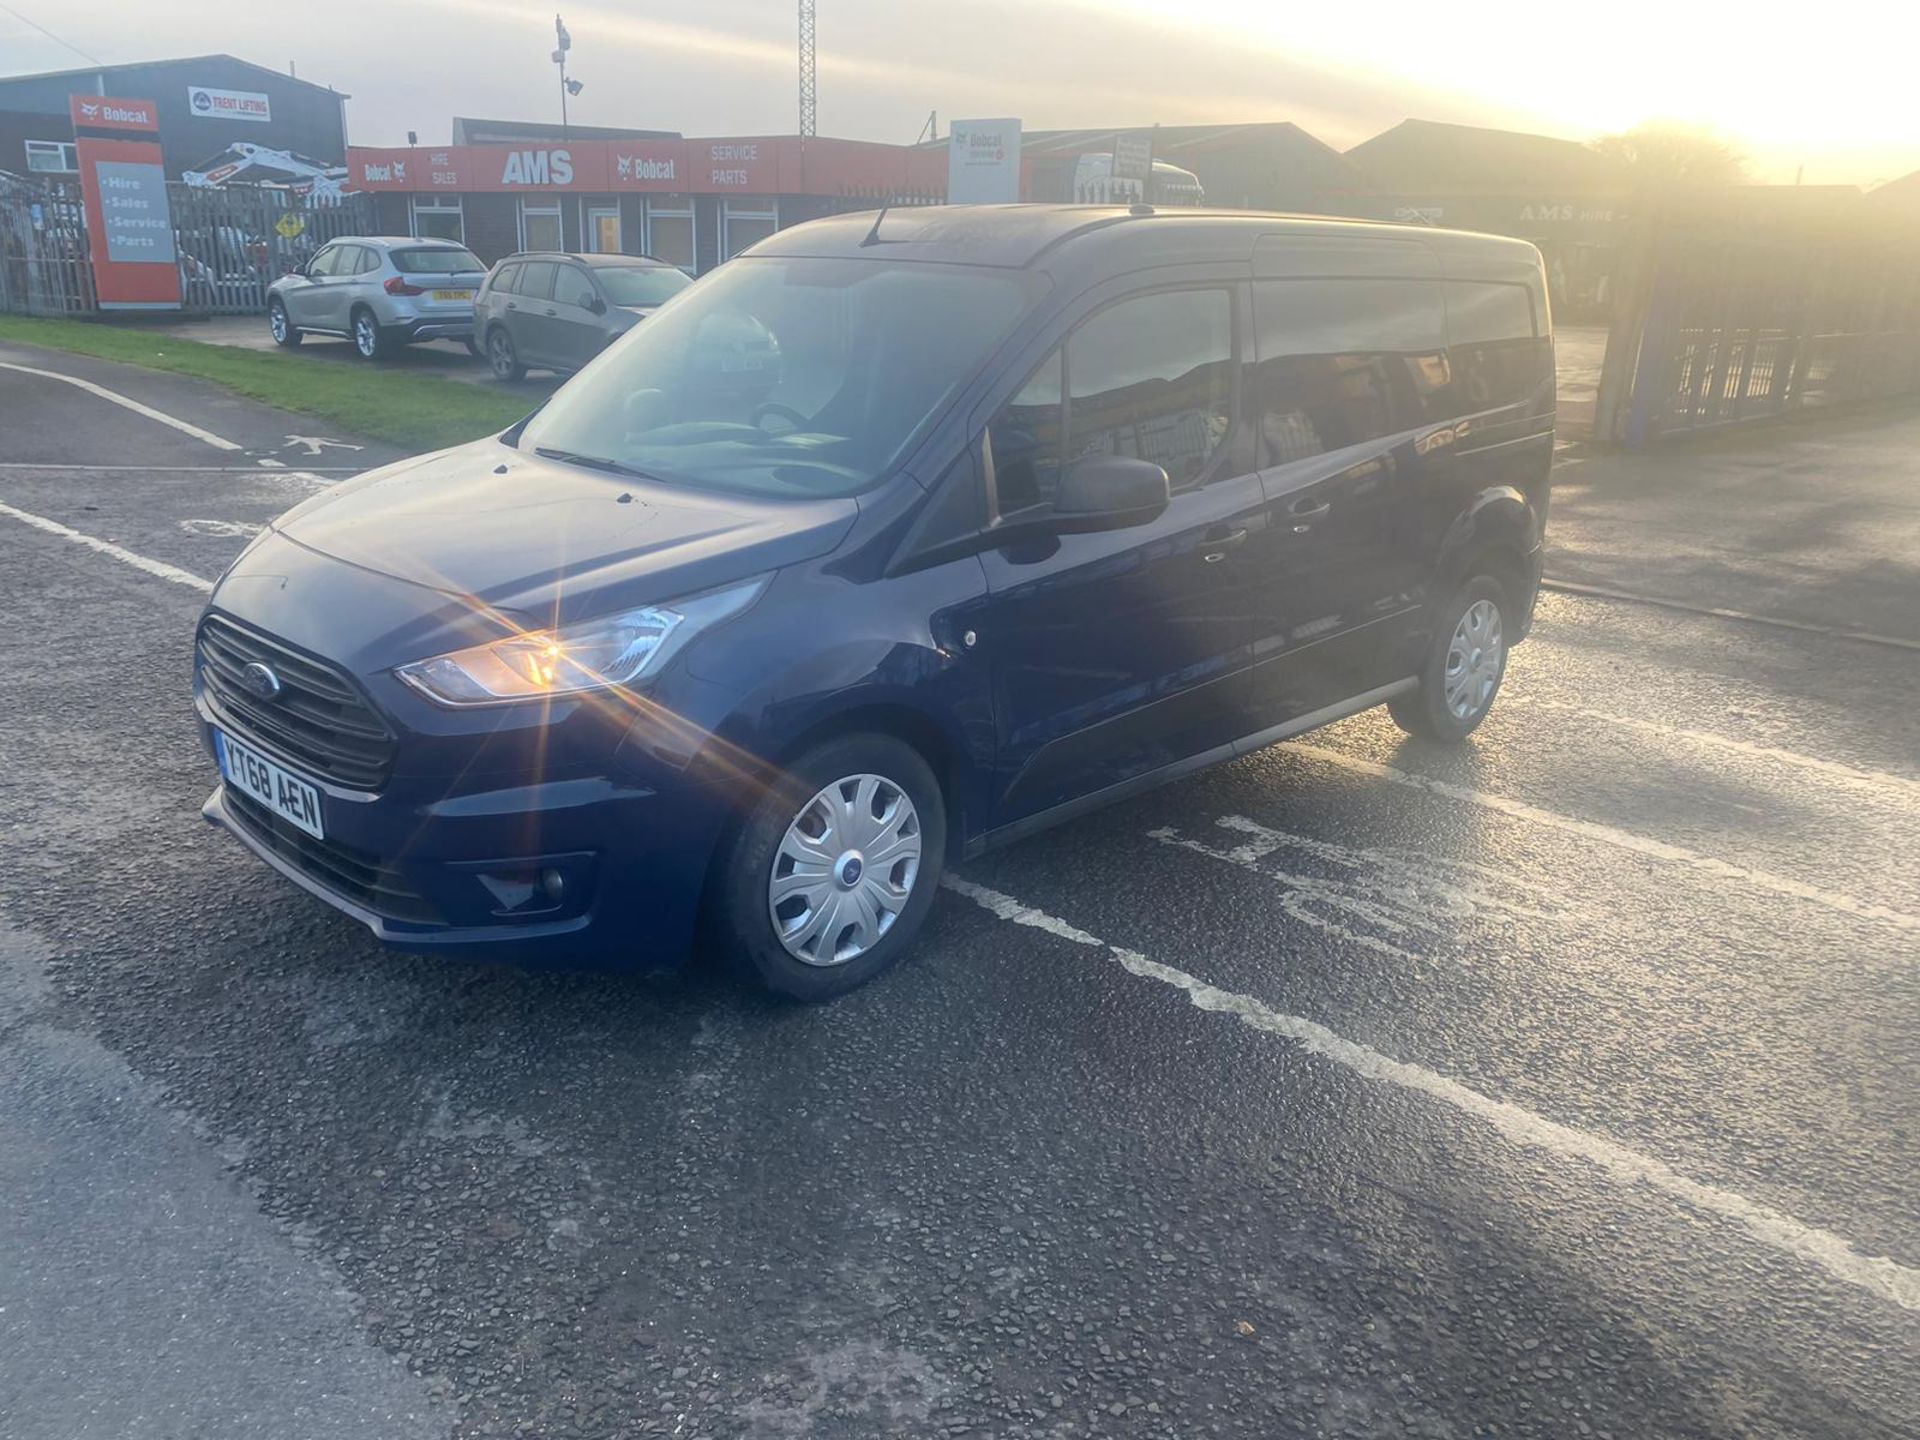 2018 68 FORD TRANSIT CONNECT TREND LWB PANEL VAN - 3 SEATS - NEWER SHAPE - AIR CON - Image 3 of 9